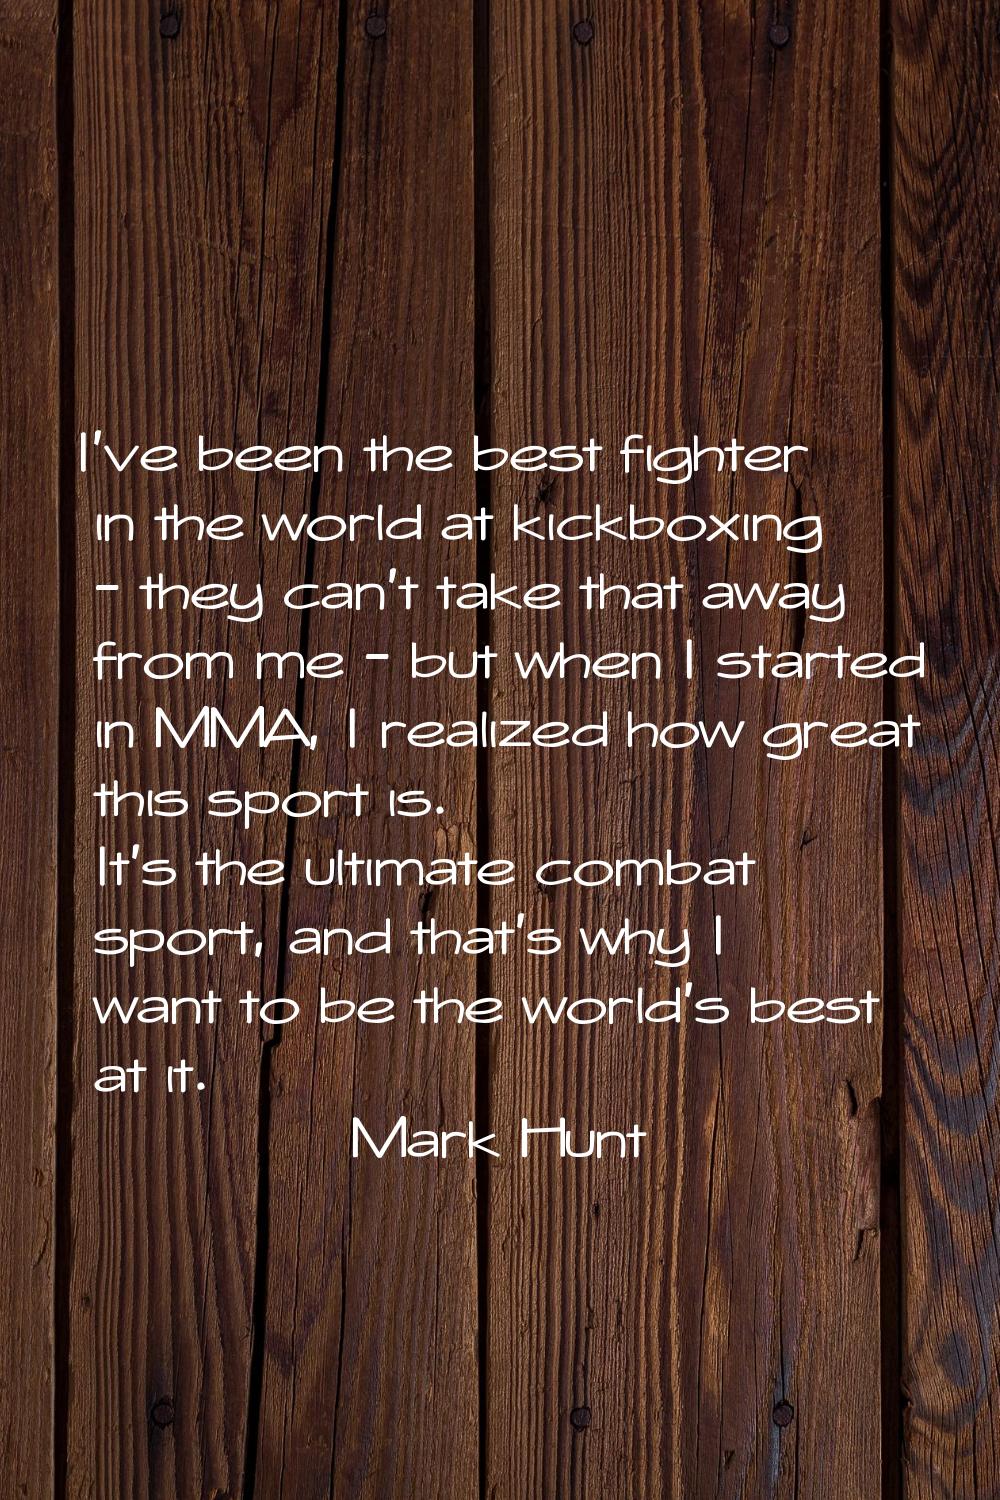 I've been the best fighter in the world at kickboxing - they can't take that away from me - but whe